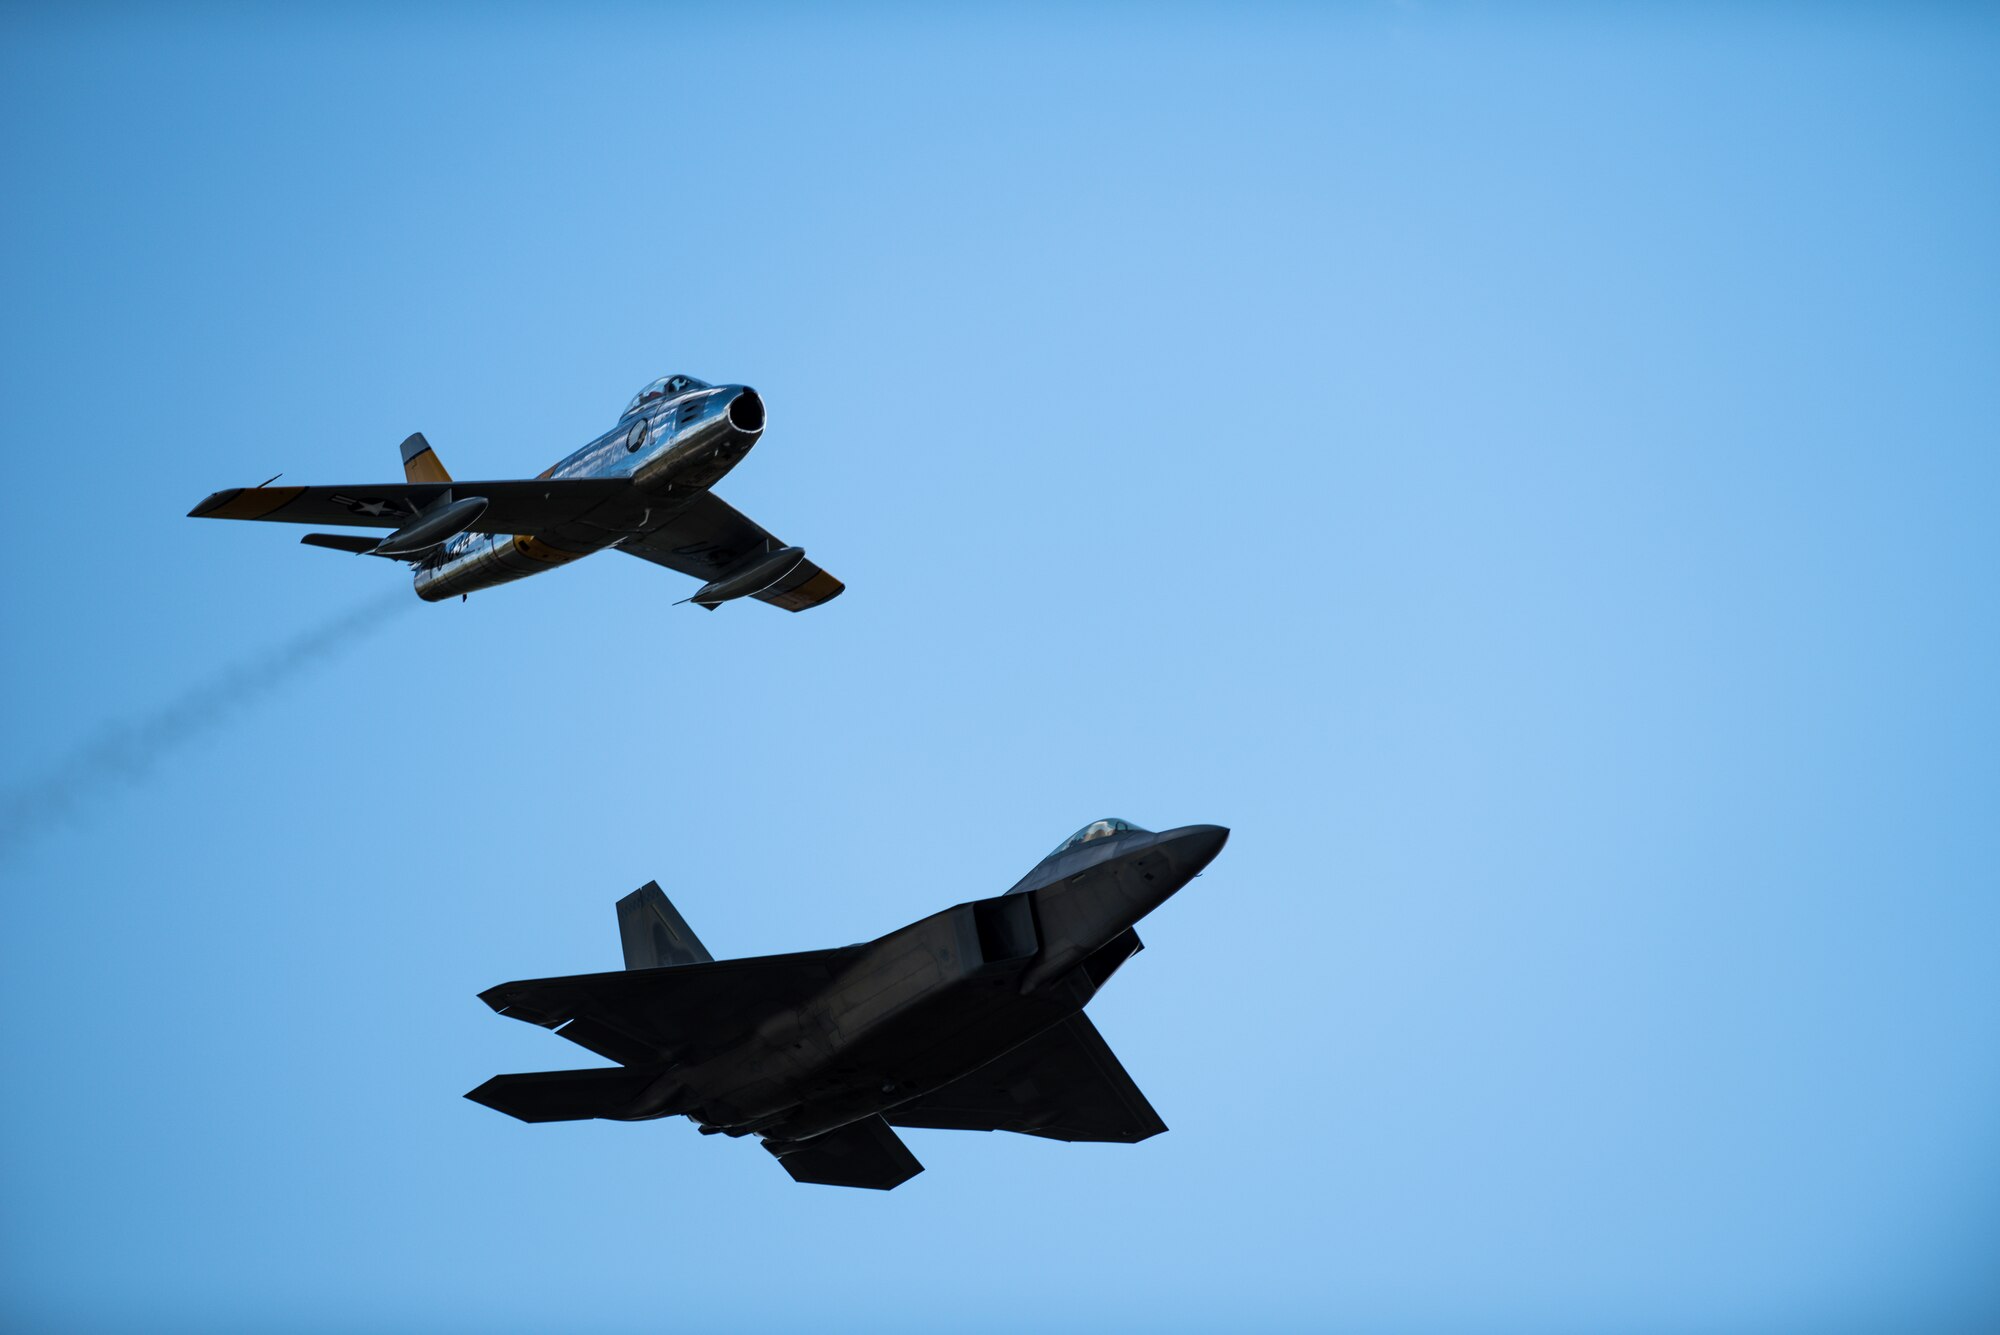 A F-86 Sabre and F-22 Raptor fly in formation during a heritage flight at the Air and Space Expo at Beale Air Force, California, April 27, 2018. The F-86 was the first swept wing fighter aircraft in the Department of Defense and was officially operated by the Air Force in 1949.(U.S Air Force photo/Senior Airman Justin Parsons)